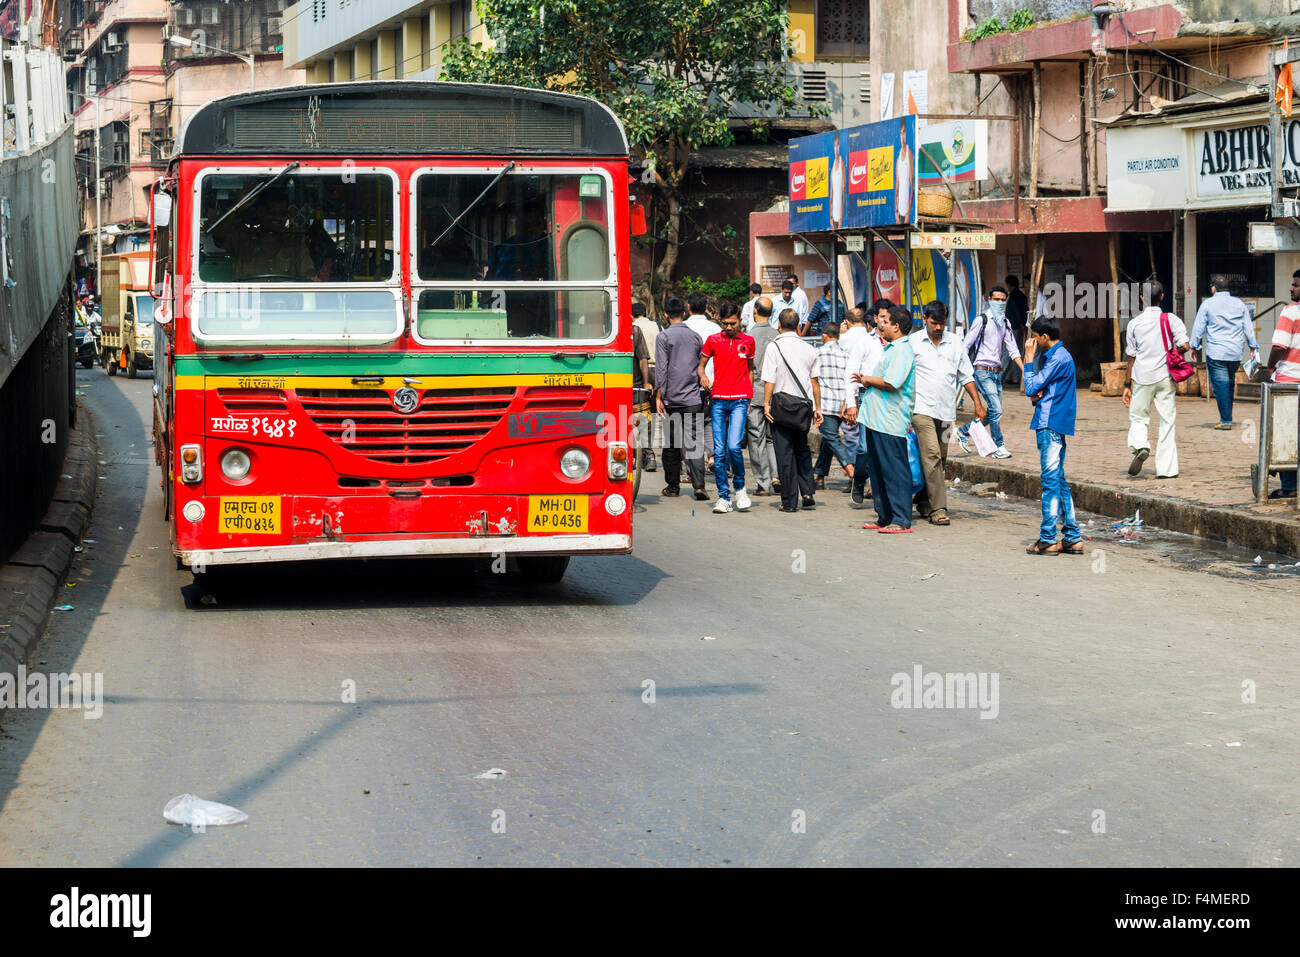 One of thousands red busses of the public transport system is driving through a market area Stock Photo